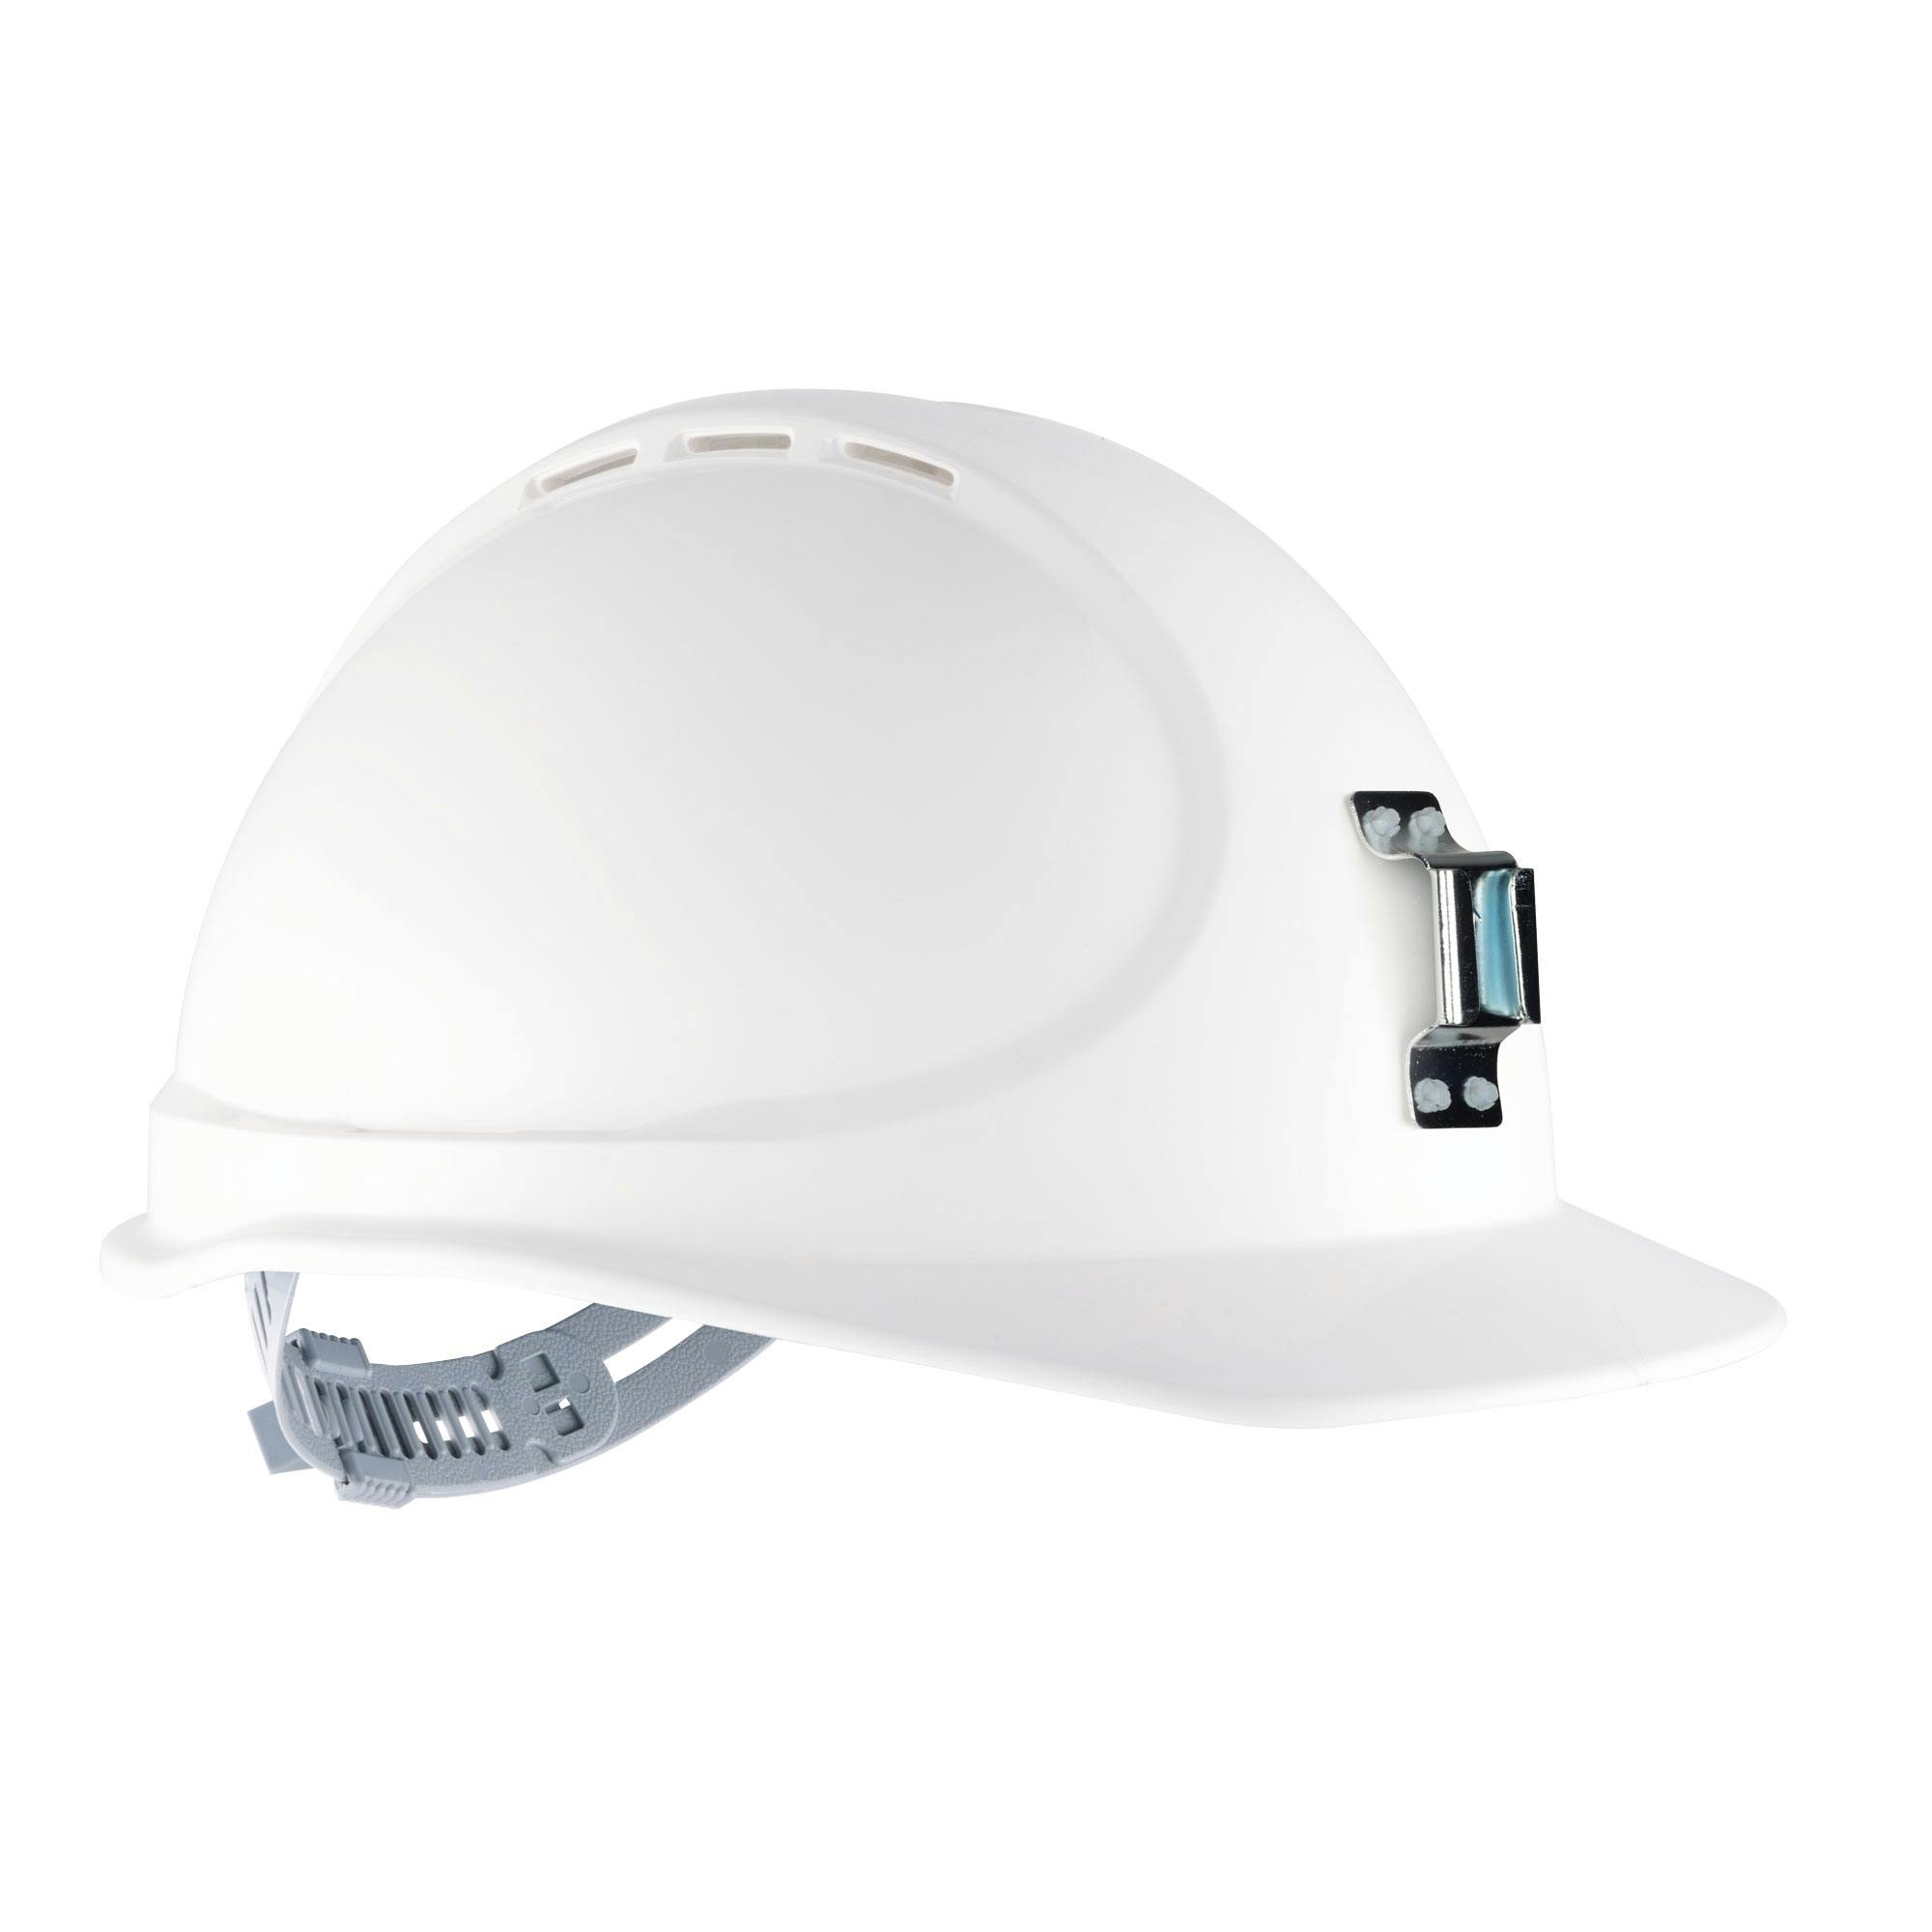 Force360 GTE9 ABS Vented Miners Hard Hat With Slide Lock Harness, Type1 (White)_2